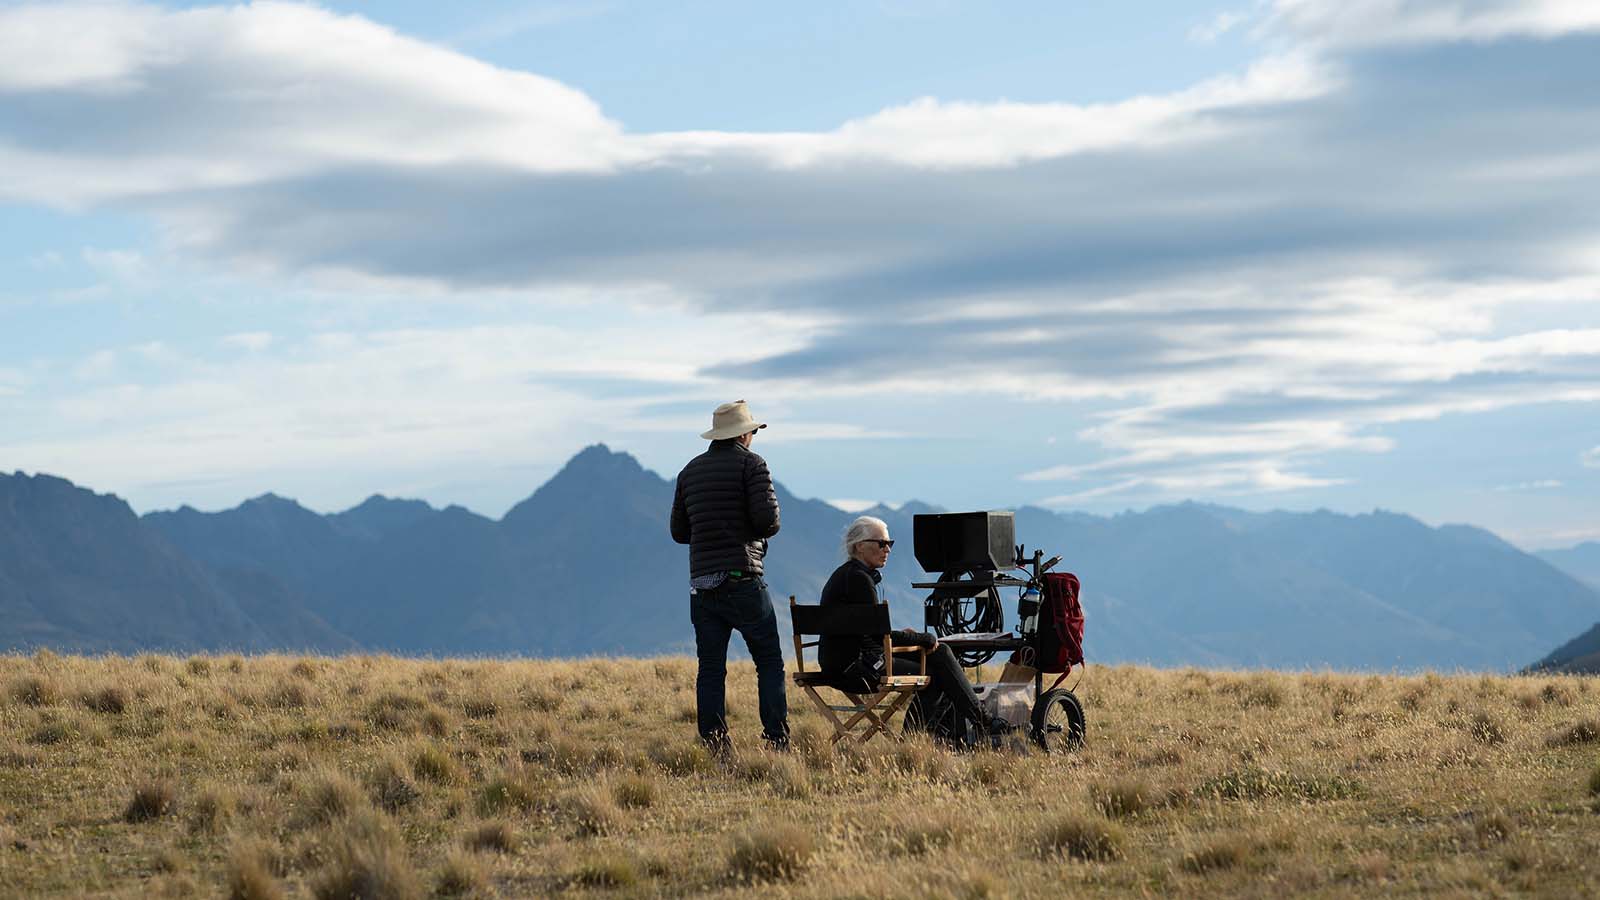 “It’s 359 degrees empty.” Jane Campion was drawn to the untouched remoteness of New Zealand’s country areas. Image © Netflix